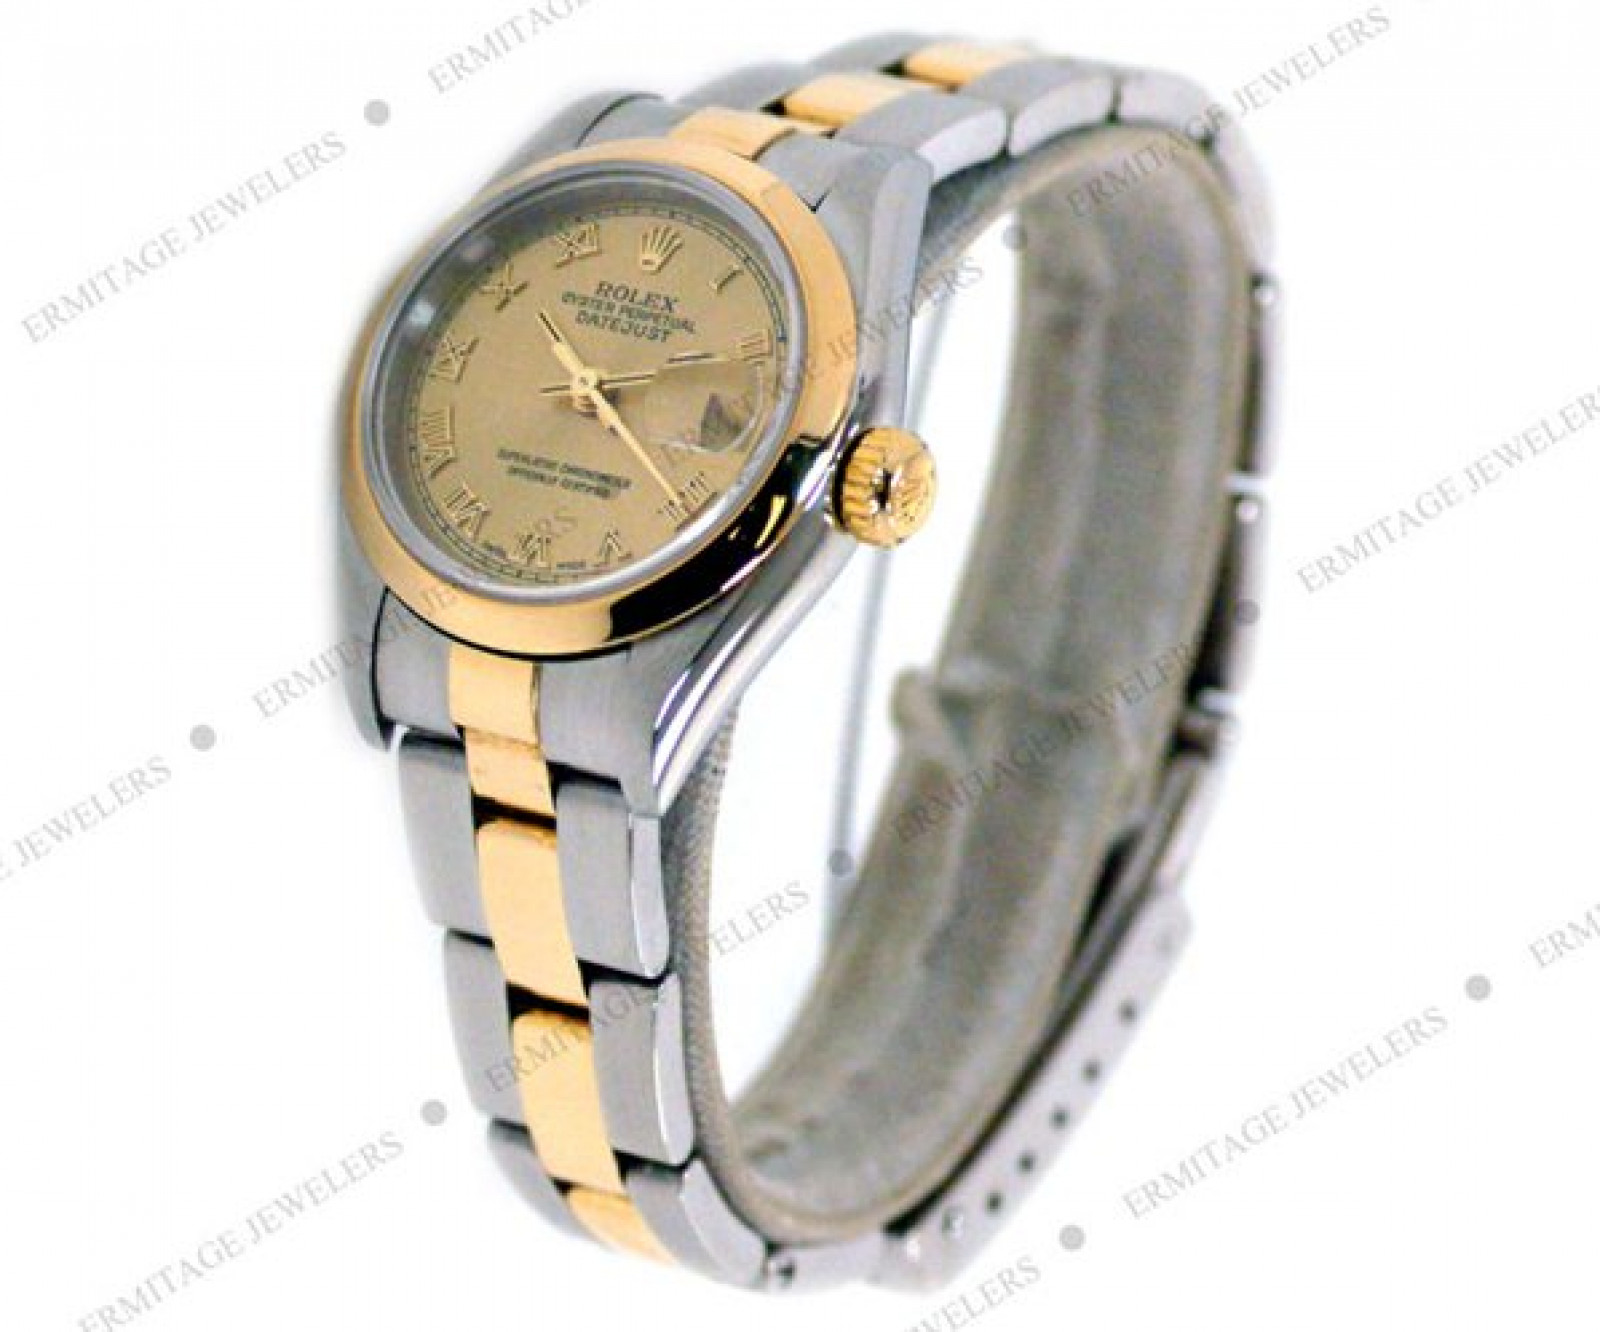 Ladies Rolex Datejust 79163 with Oyster Bracelet